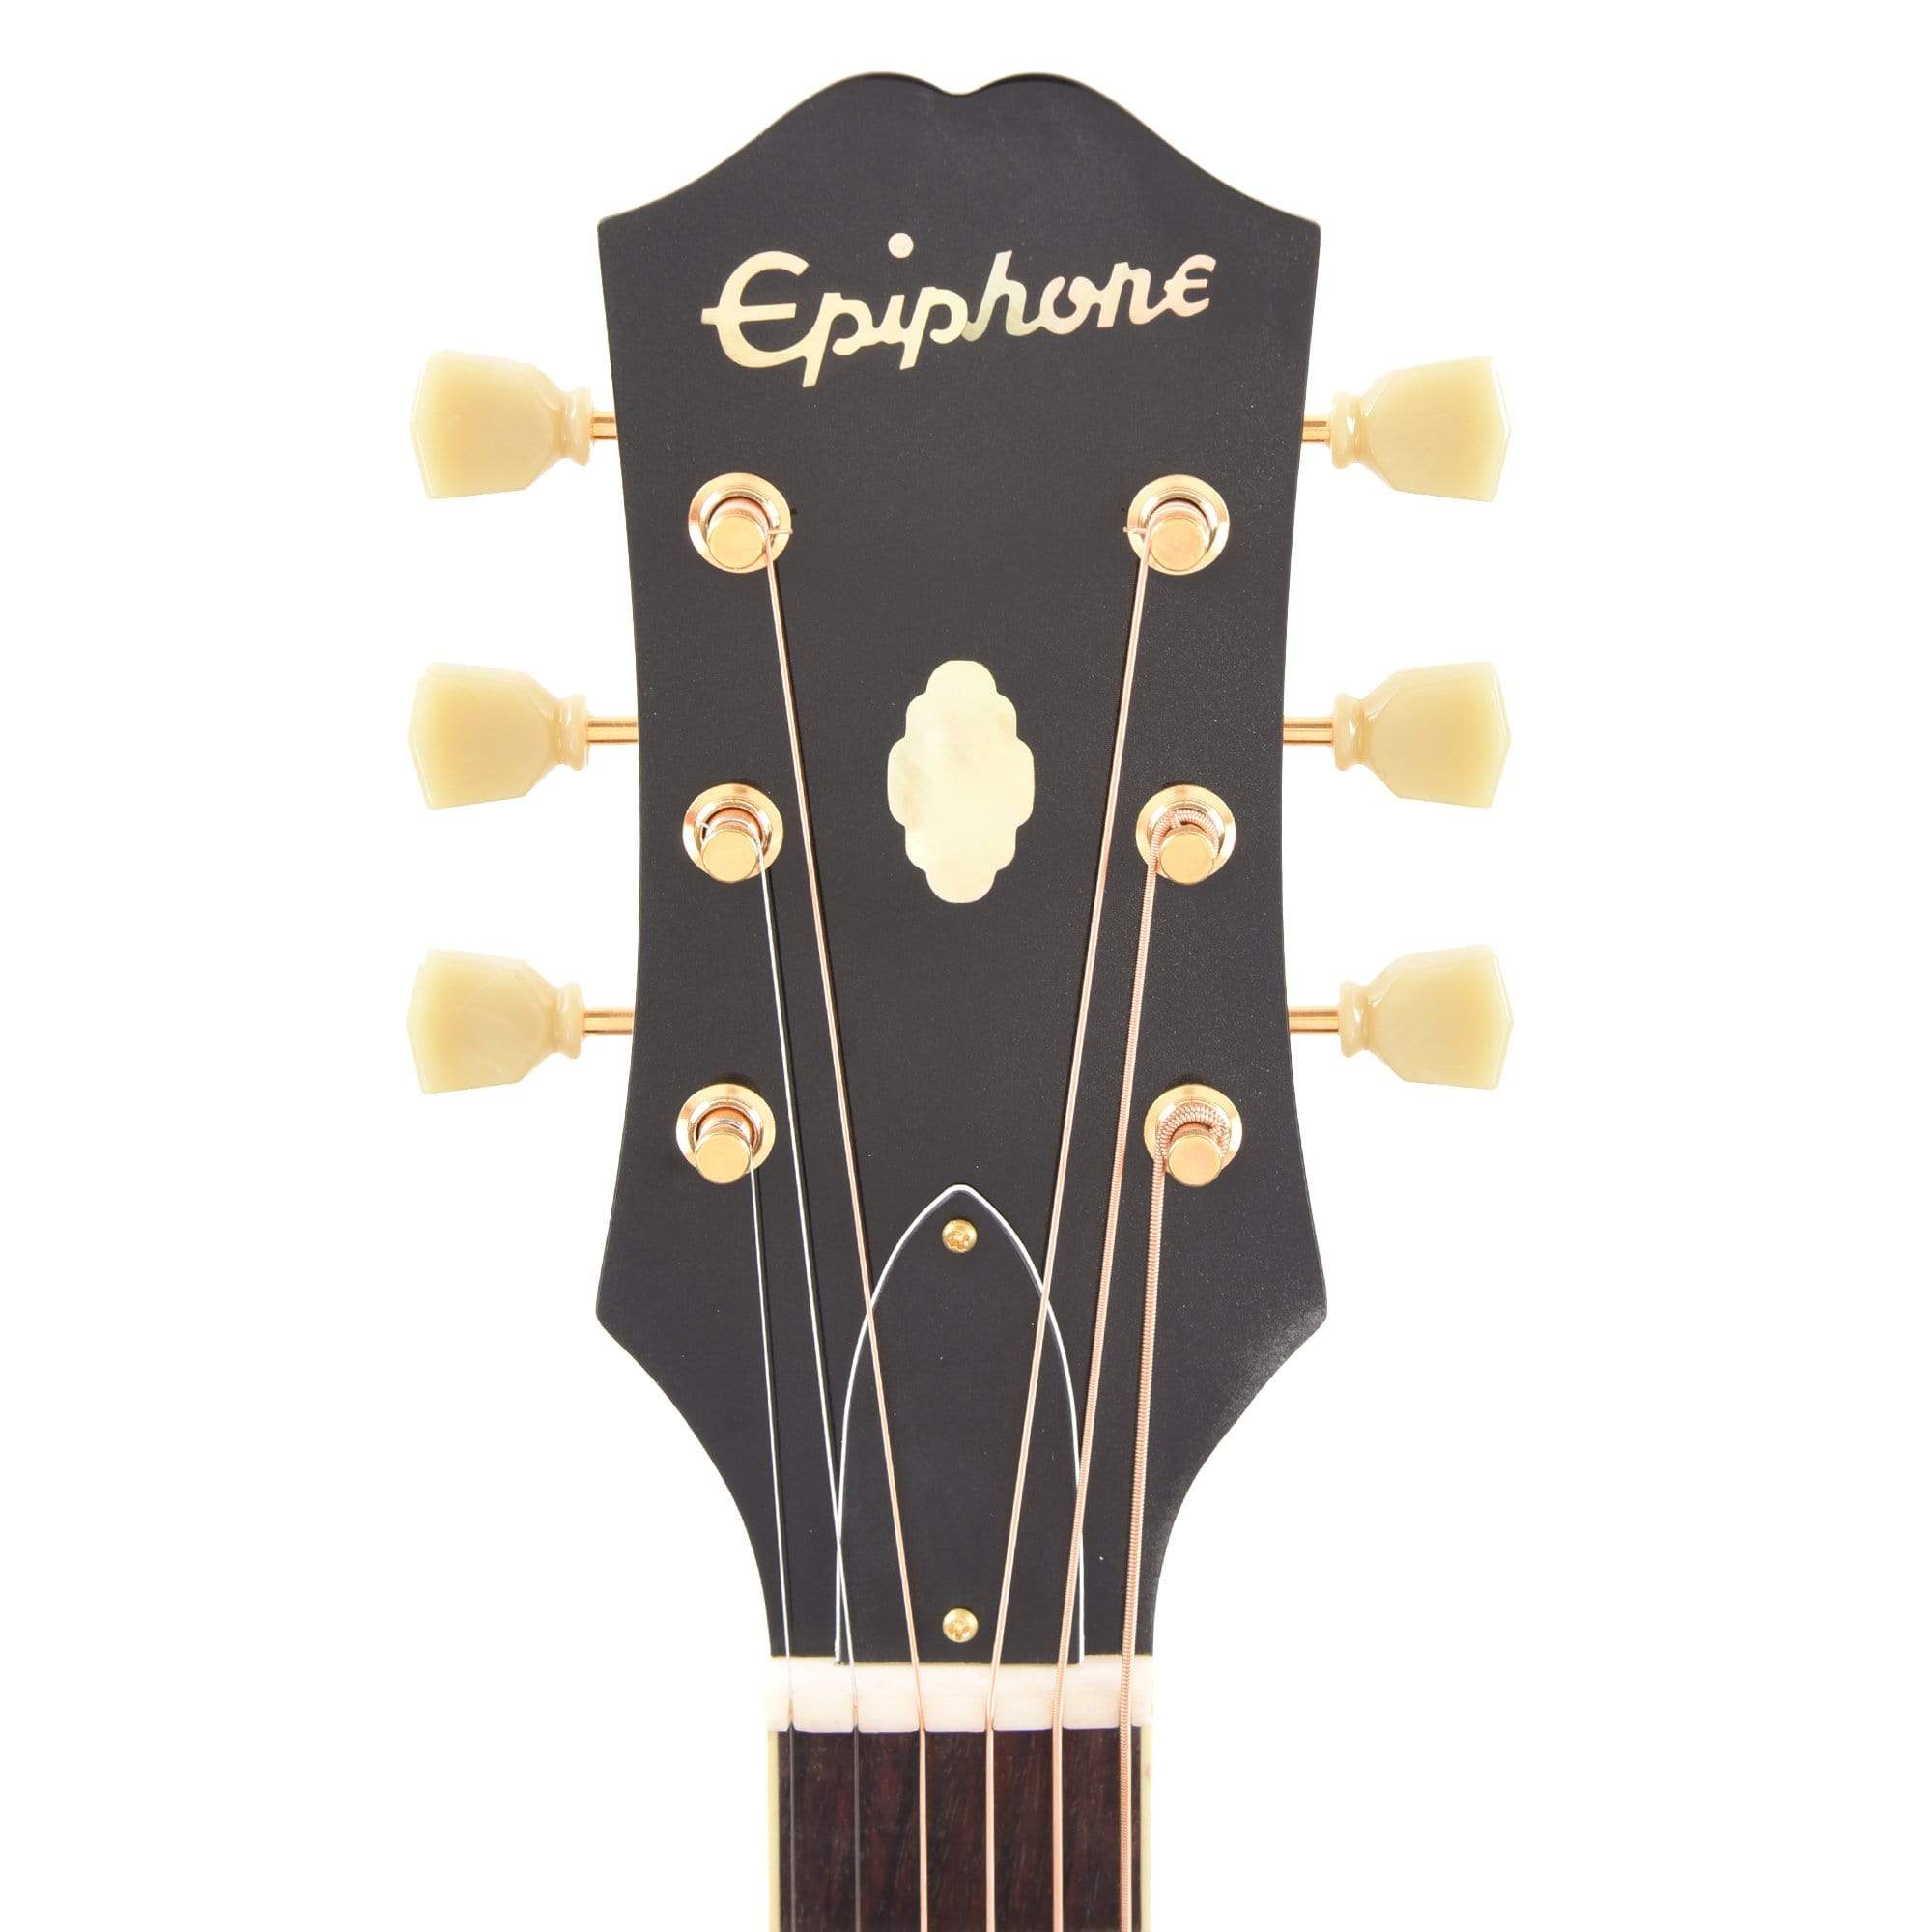 Epiphone USA Frontier Antique Natural LEFTY w/Pickup Acoustic Guitars / Left-Handed